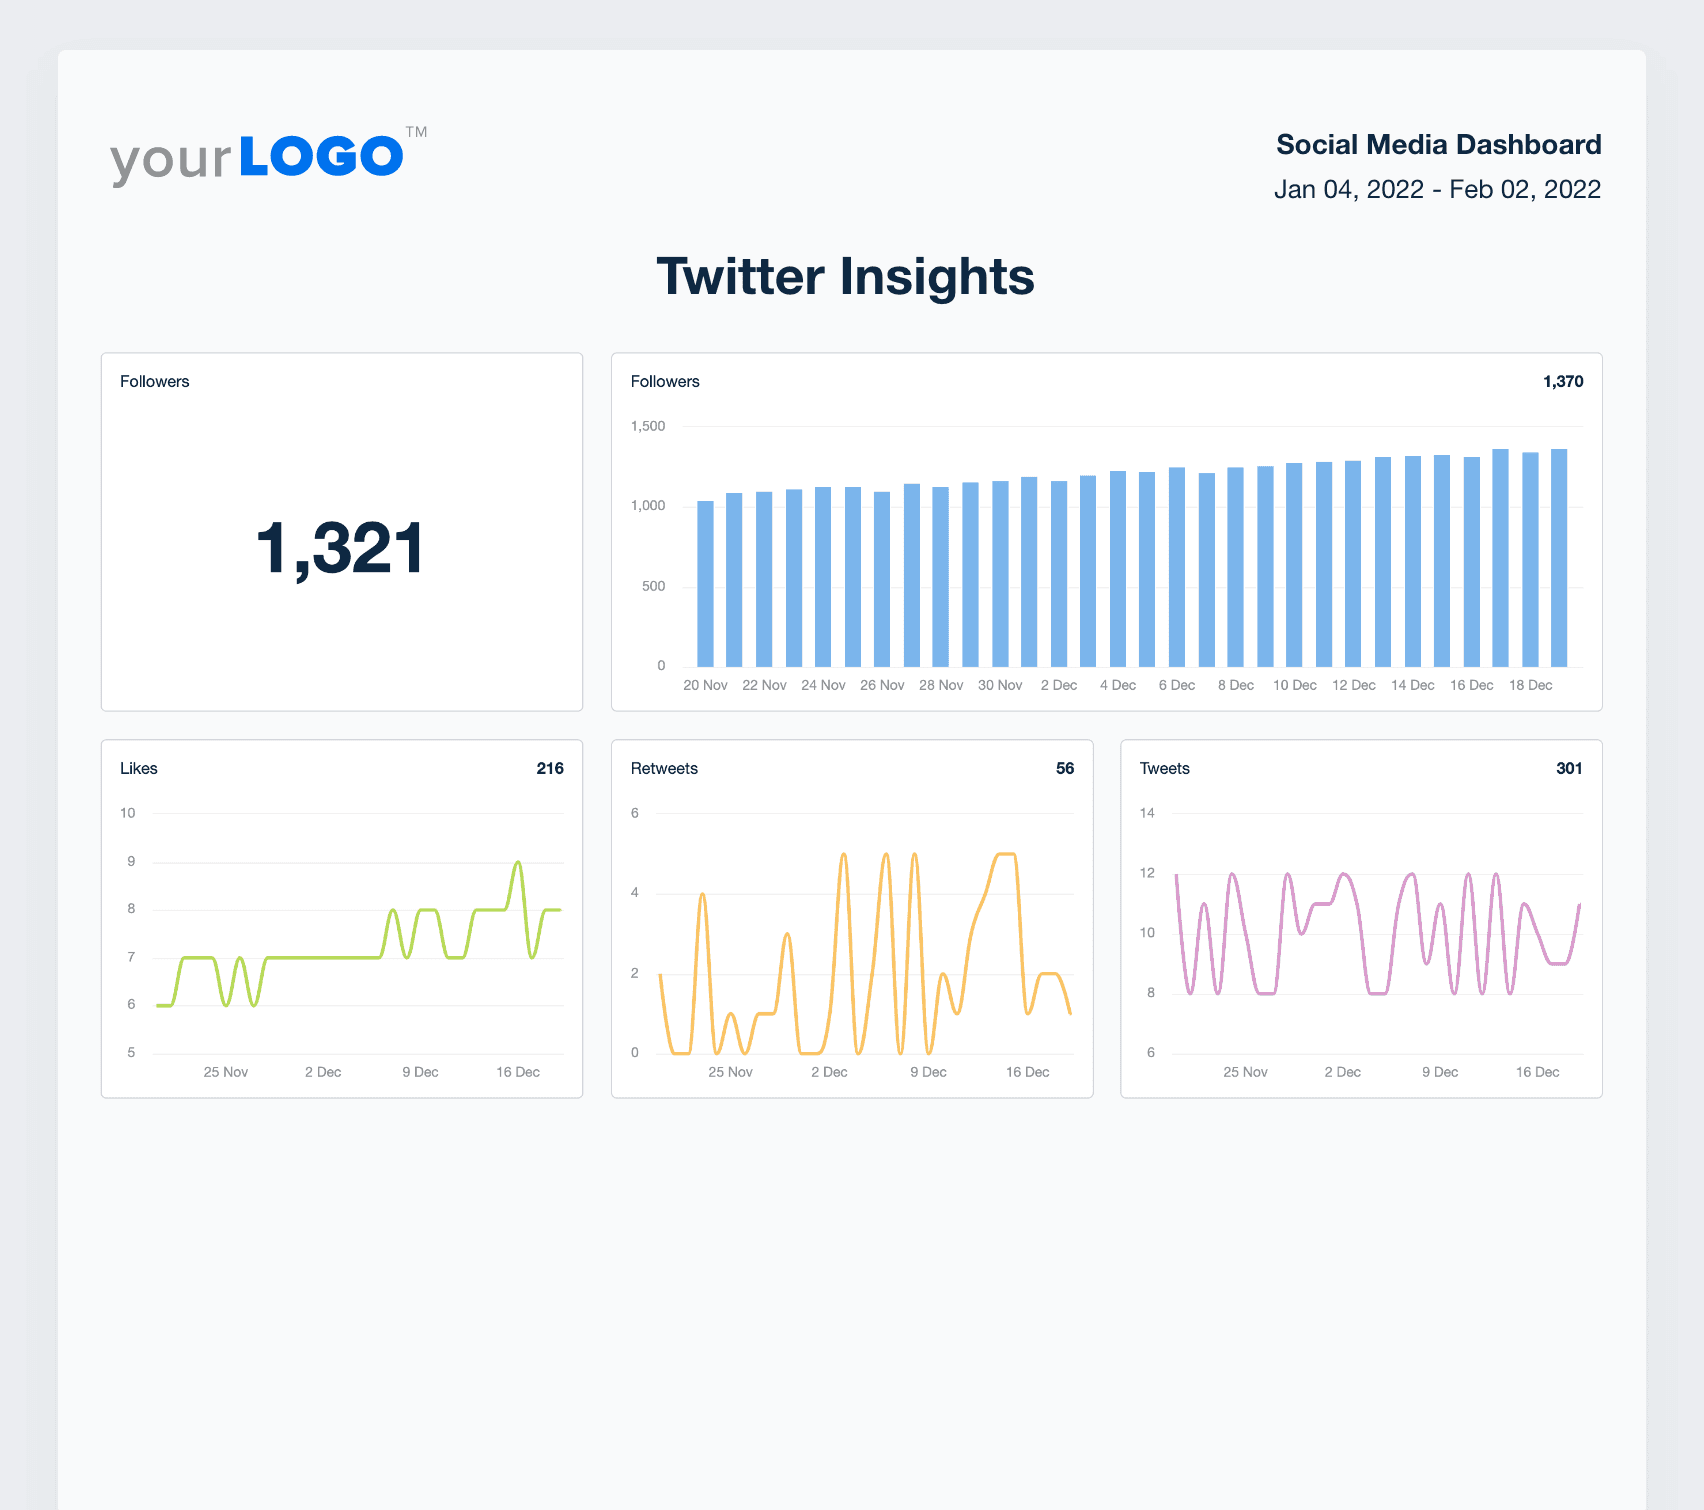 An example of the Twitter Insights data report